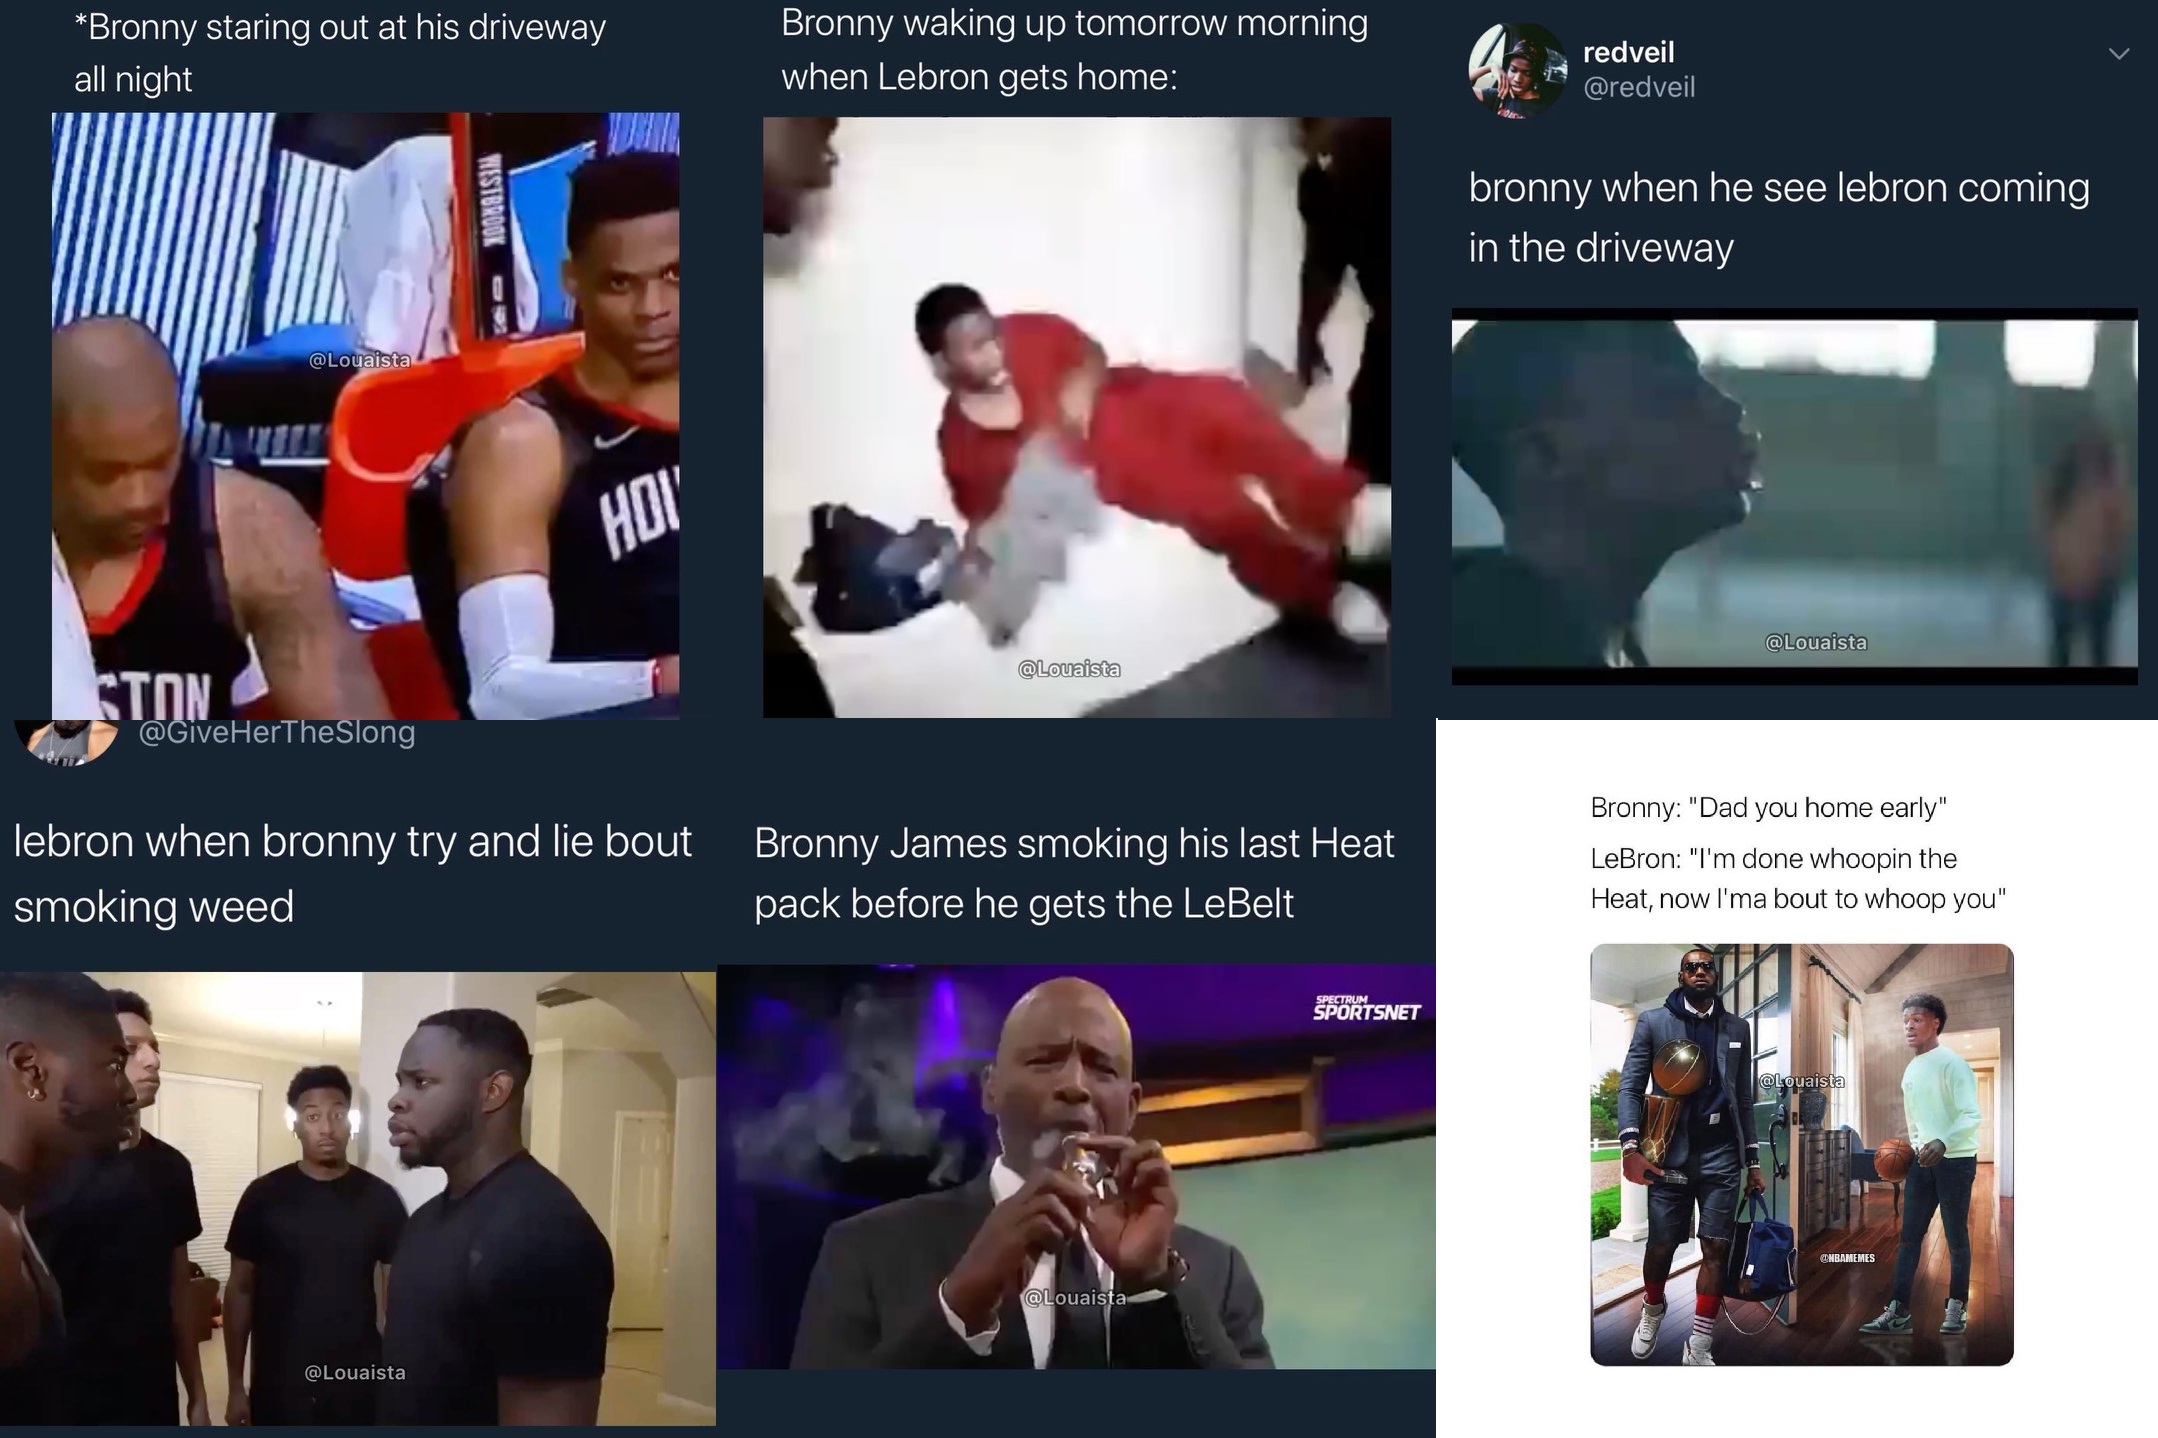 Bronny James began trending, last night, as the Lakers celebrated their NBA championship. His dad, LeBron James, won NBA Finals MVP, and delivered his speech, about returning home to be with his family. Twitter immediately had jokes about LeBron coming home to give Bronny a whooping, over the smoking weed incident.